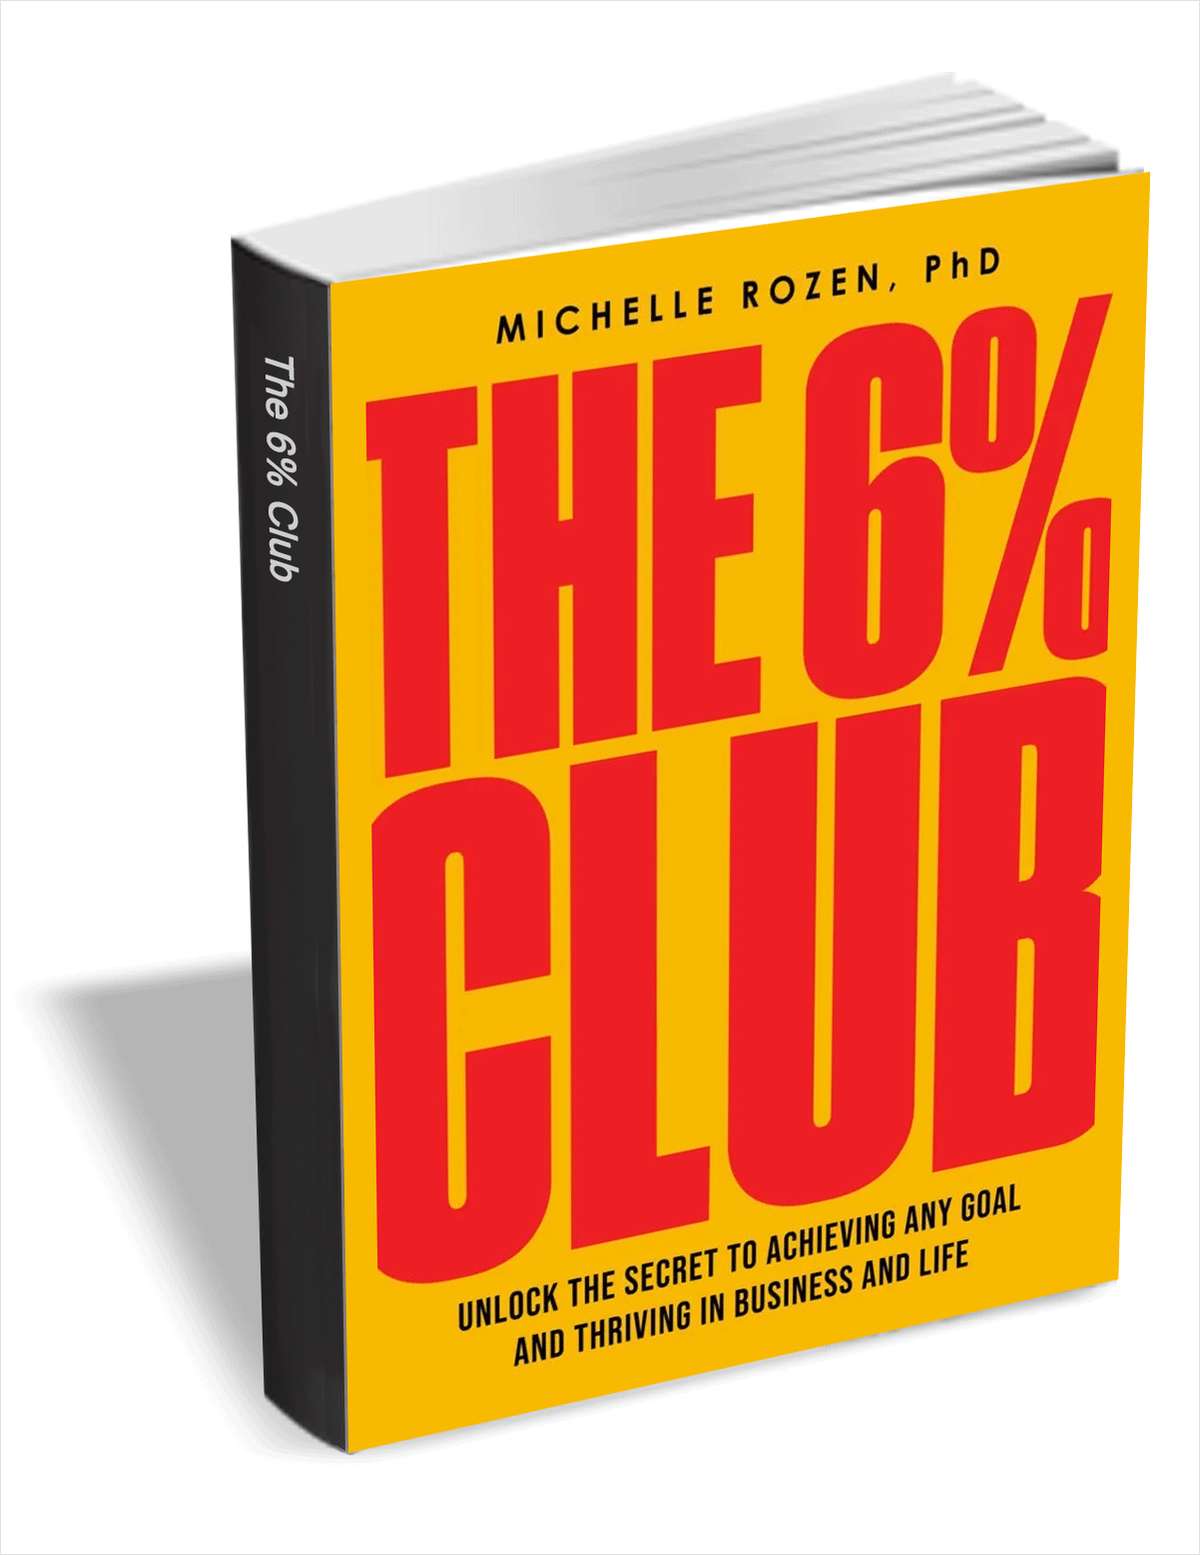 The 6% Club: Master the Secret Formula for Success and Join the Ranks of Goal Achievers Who Actually Follow Through ($28.00 Value) FREE for a Limited Time